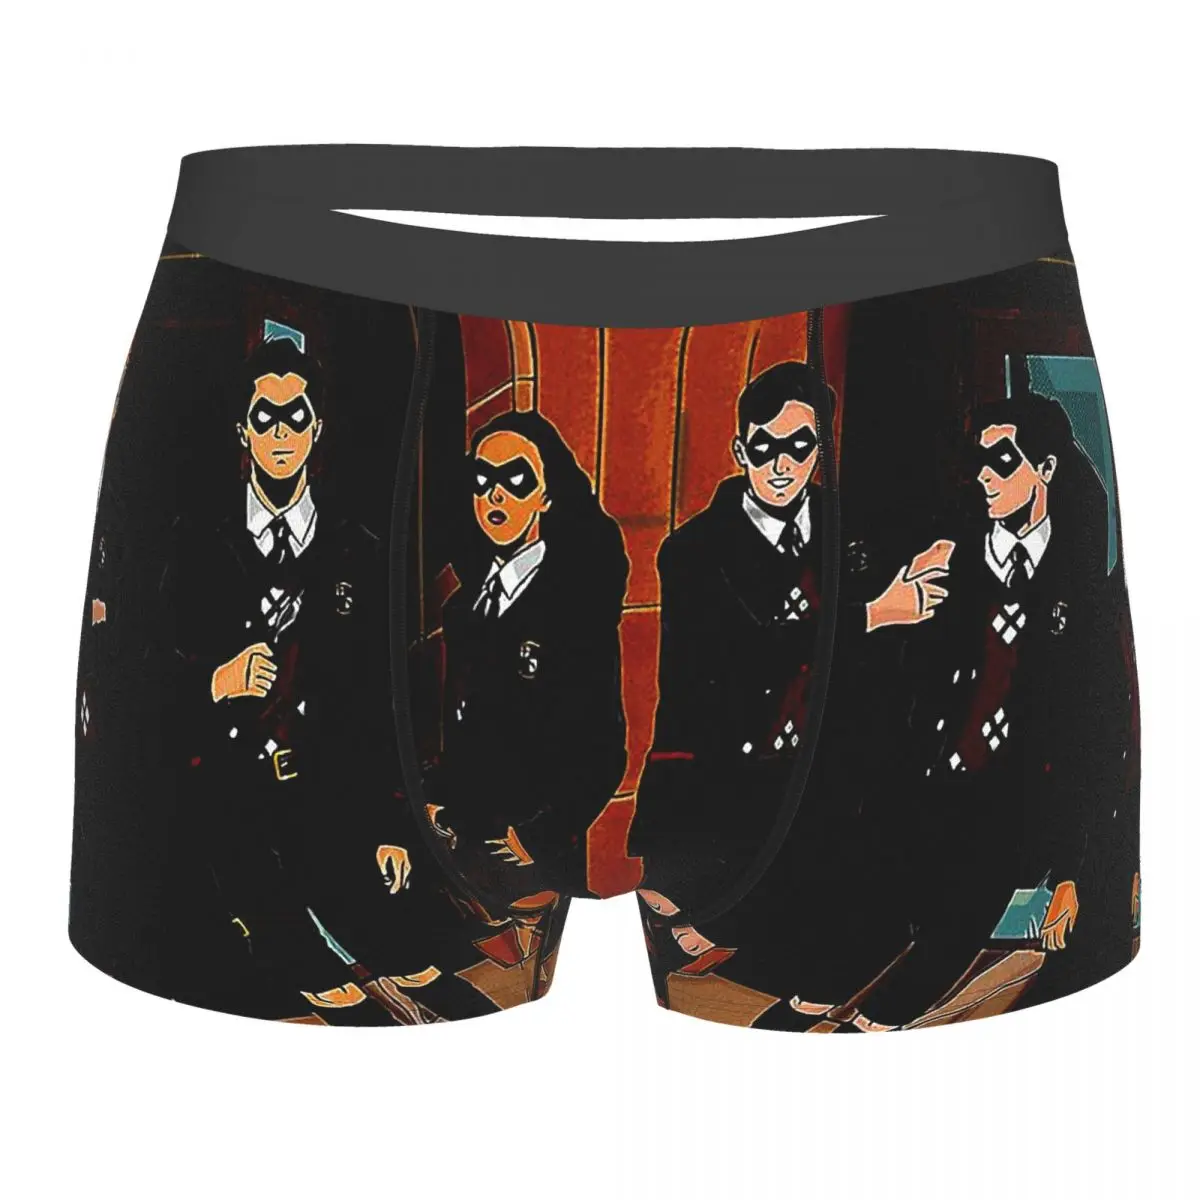 

COOL The Umbrella Academy Luther Diego Allison Klaus nderpants Breathbale Panties Man Underwear Sexy Shorts Boxer Briefs